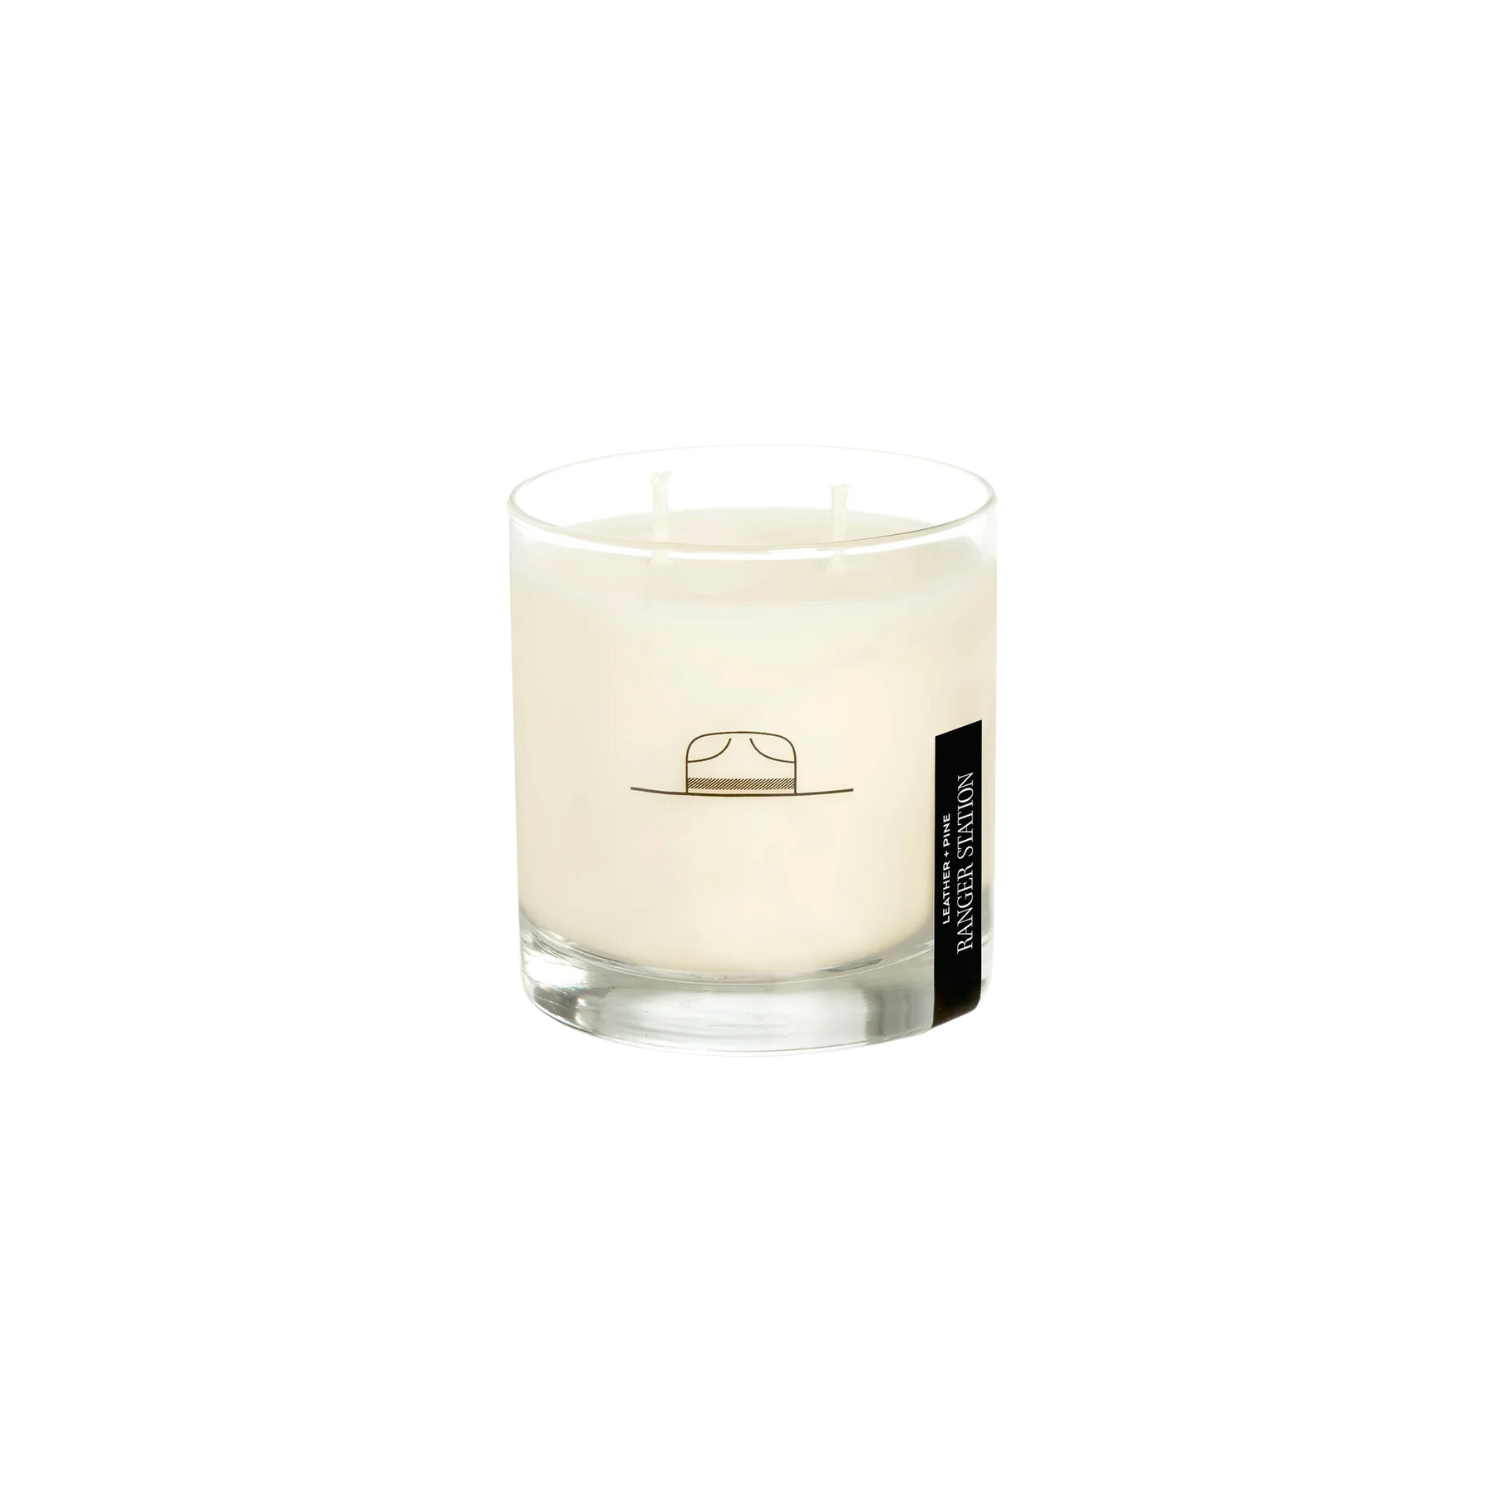 Ranger Station Secented Candle - Leather & Pine